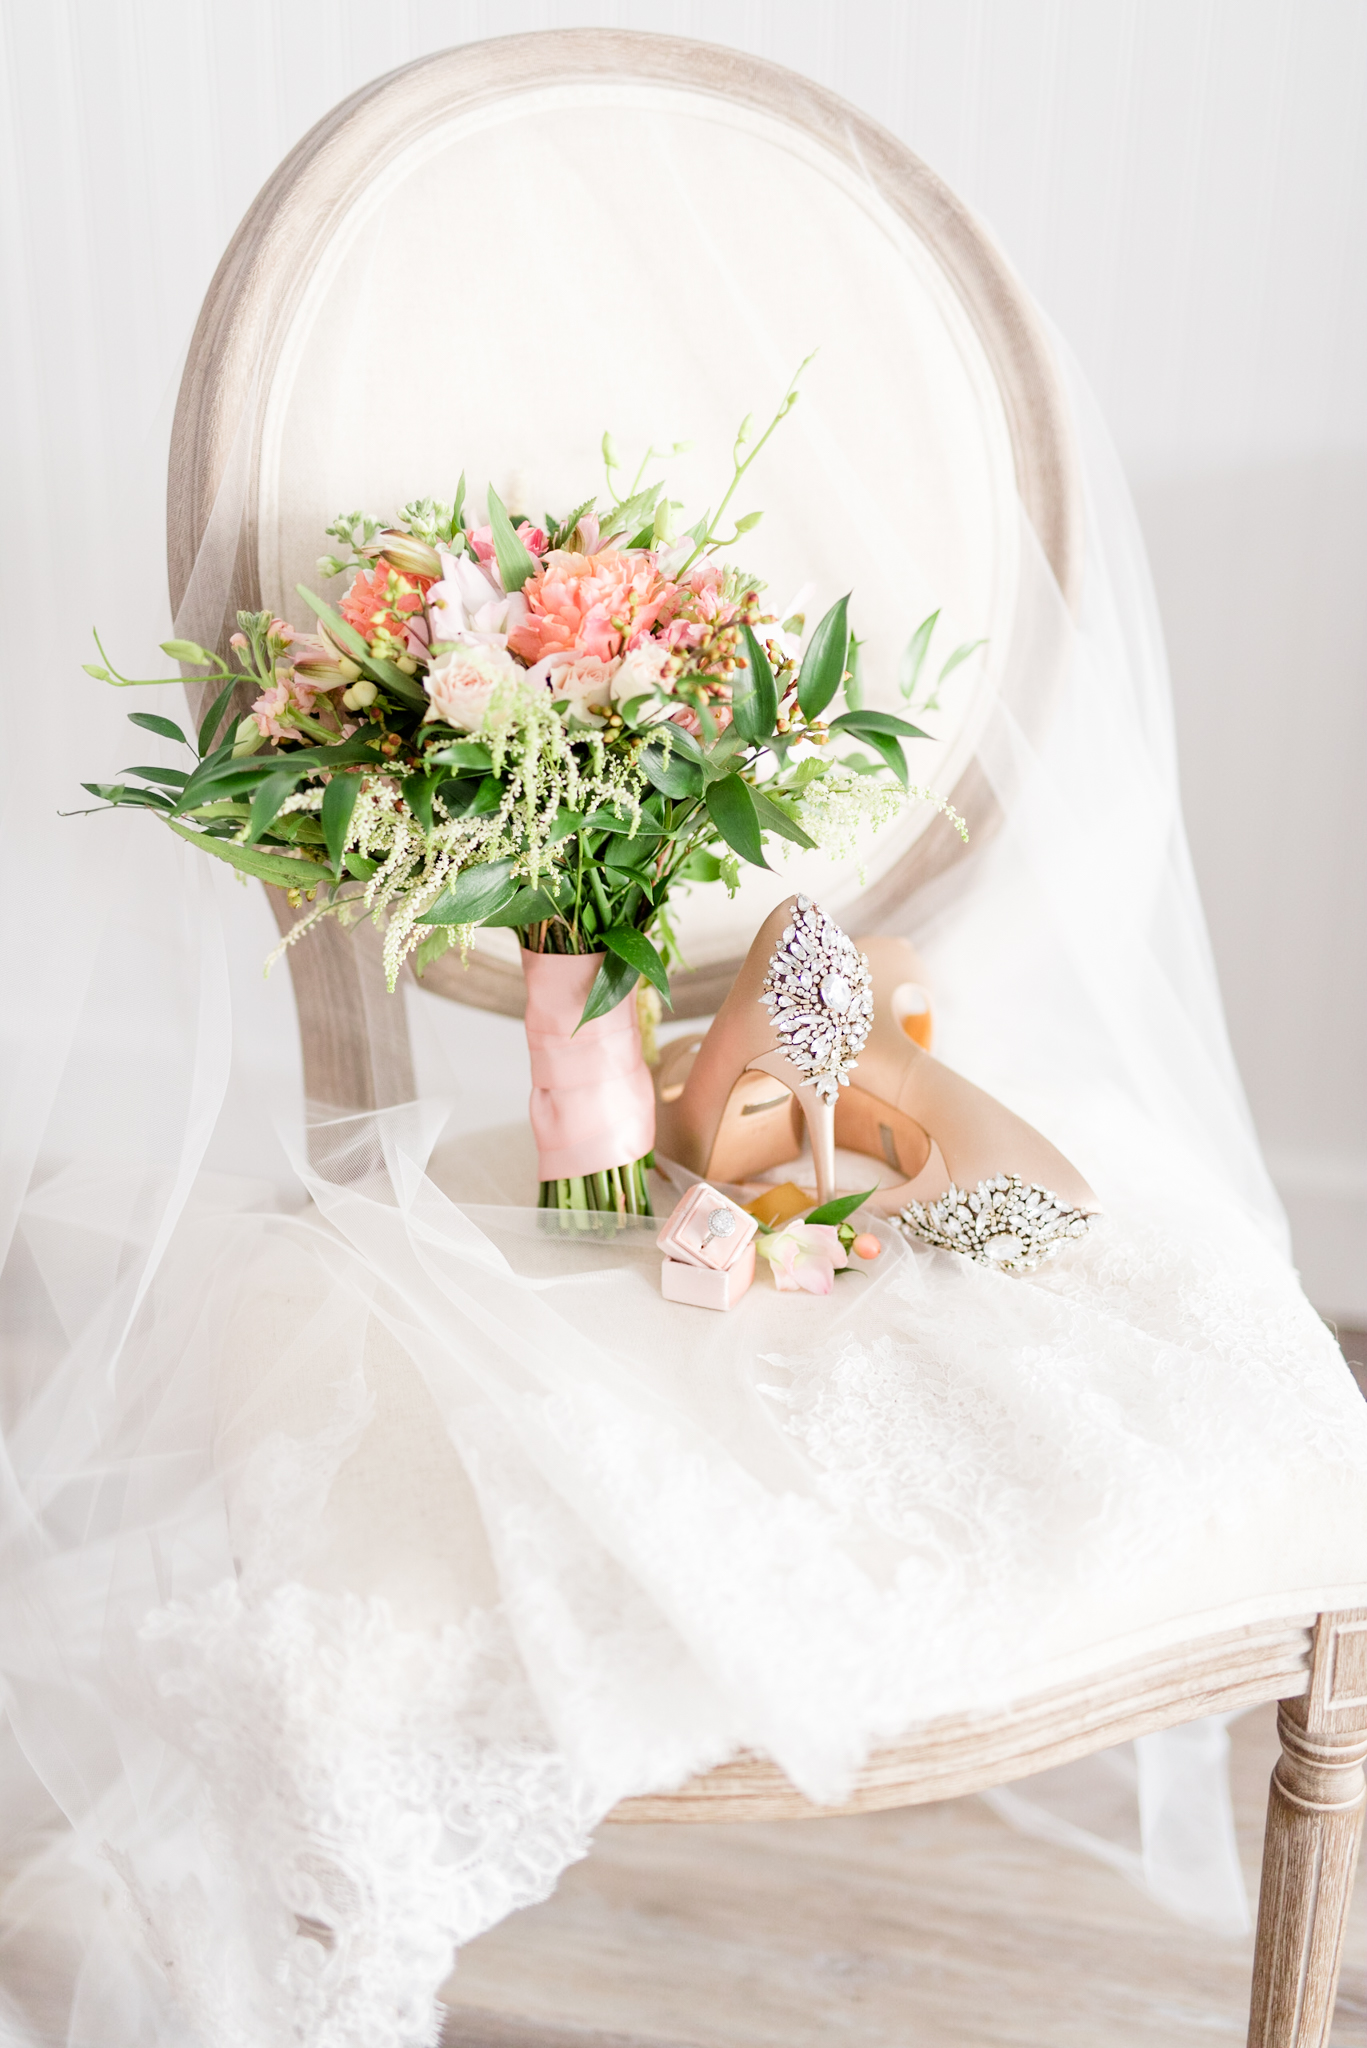 Wedding Shoes and flowers sit on chair